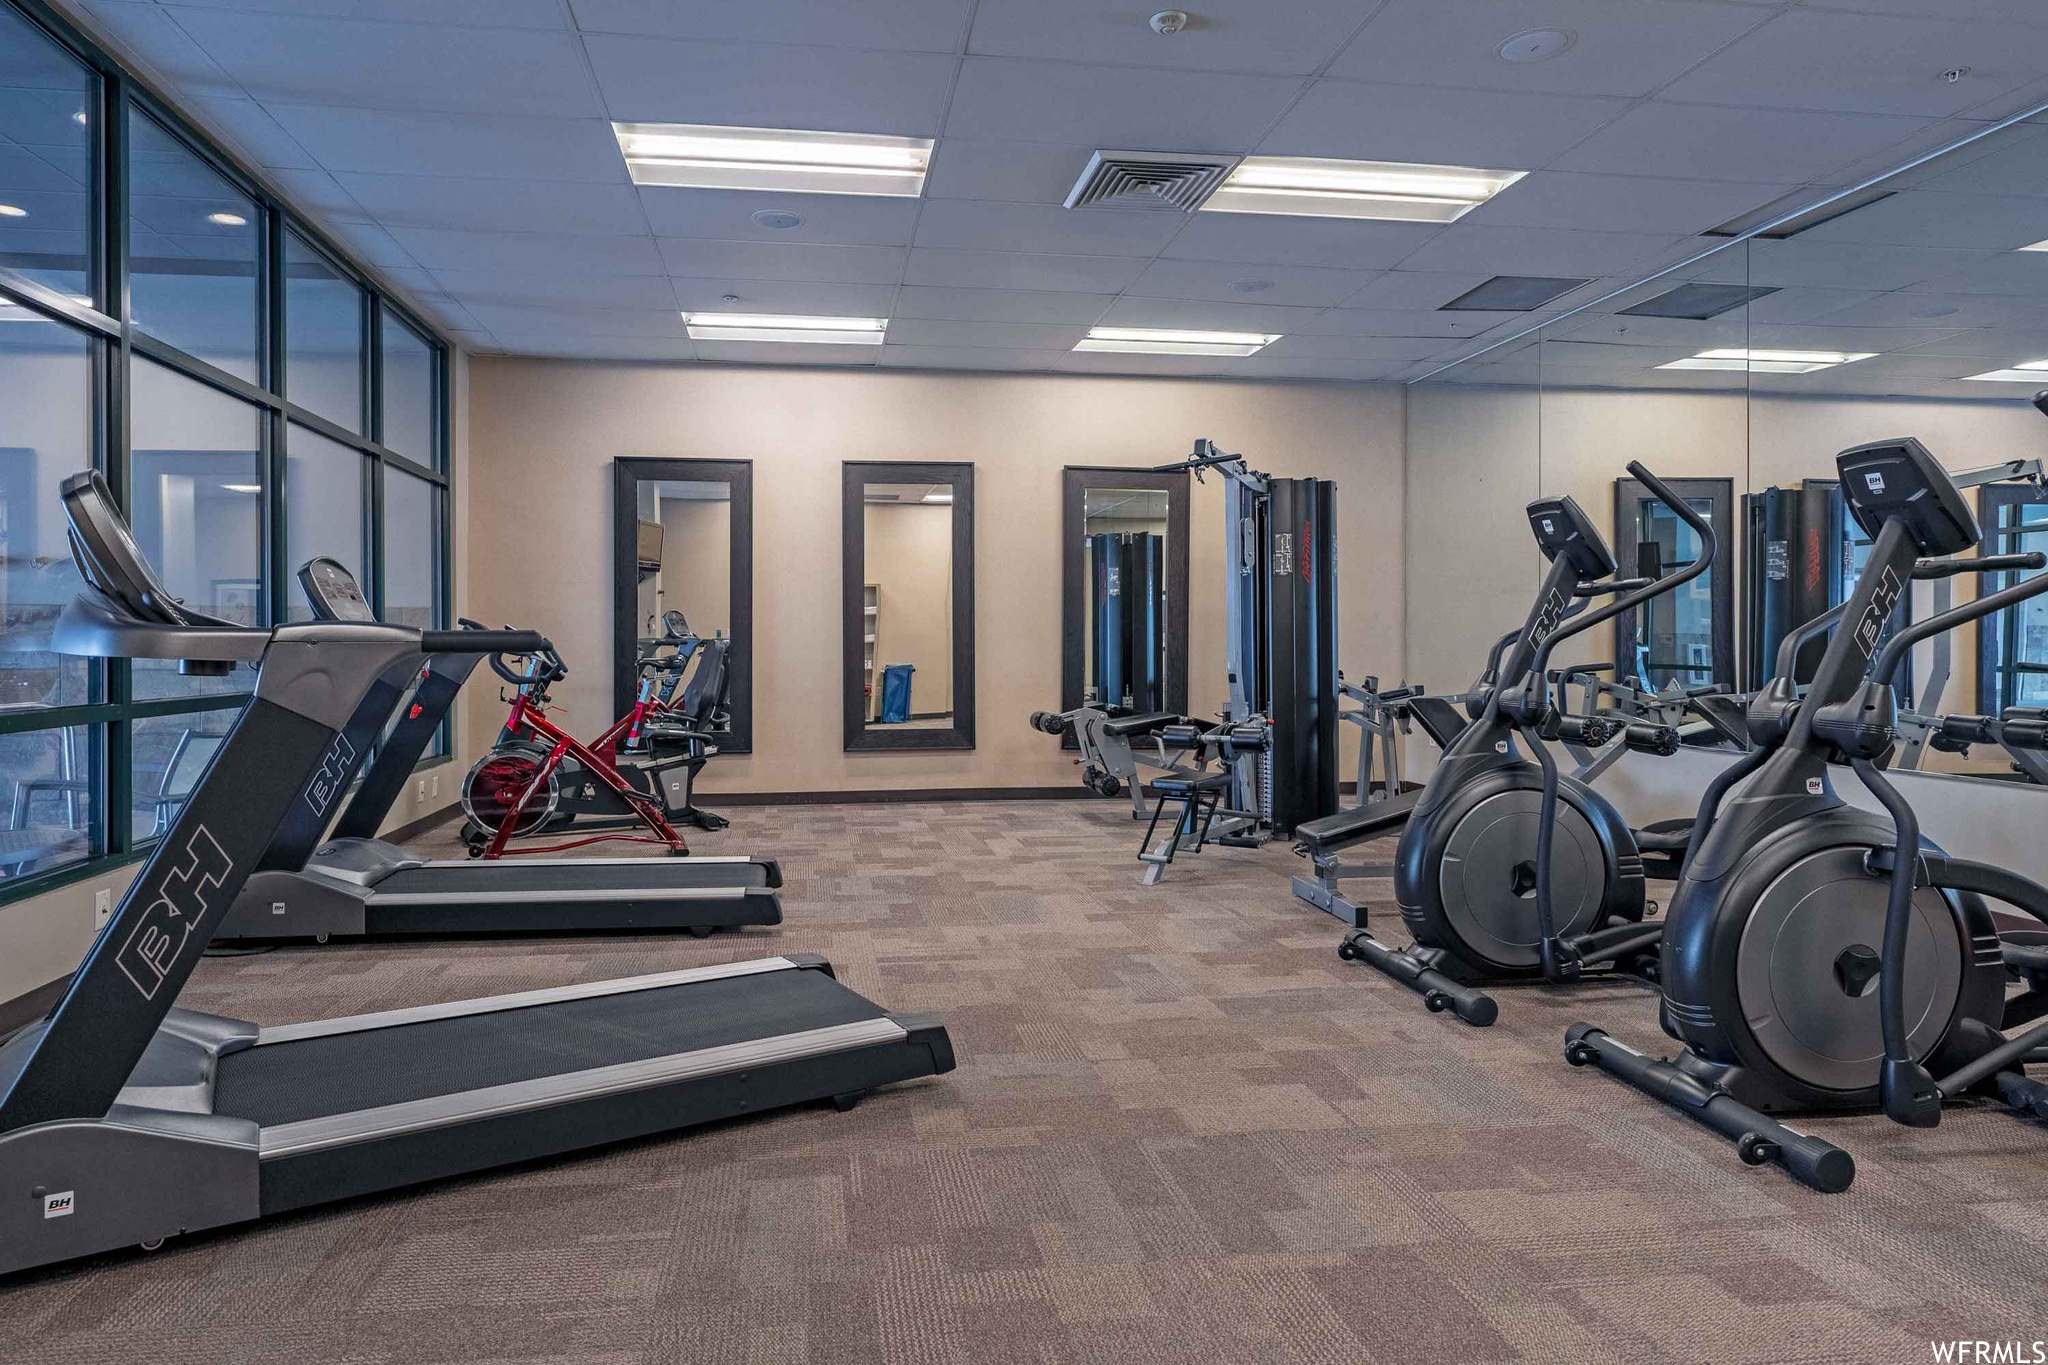 Workout area featuring a drop ceiling and carpet flooring